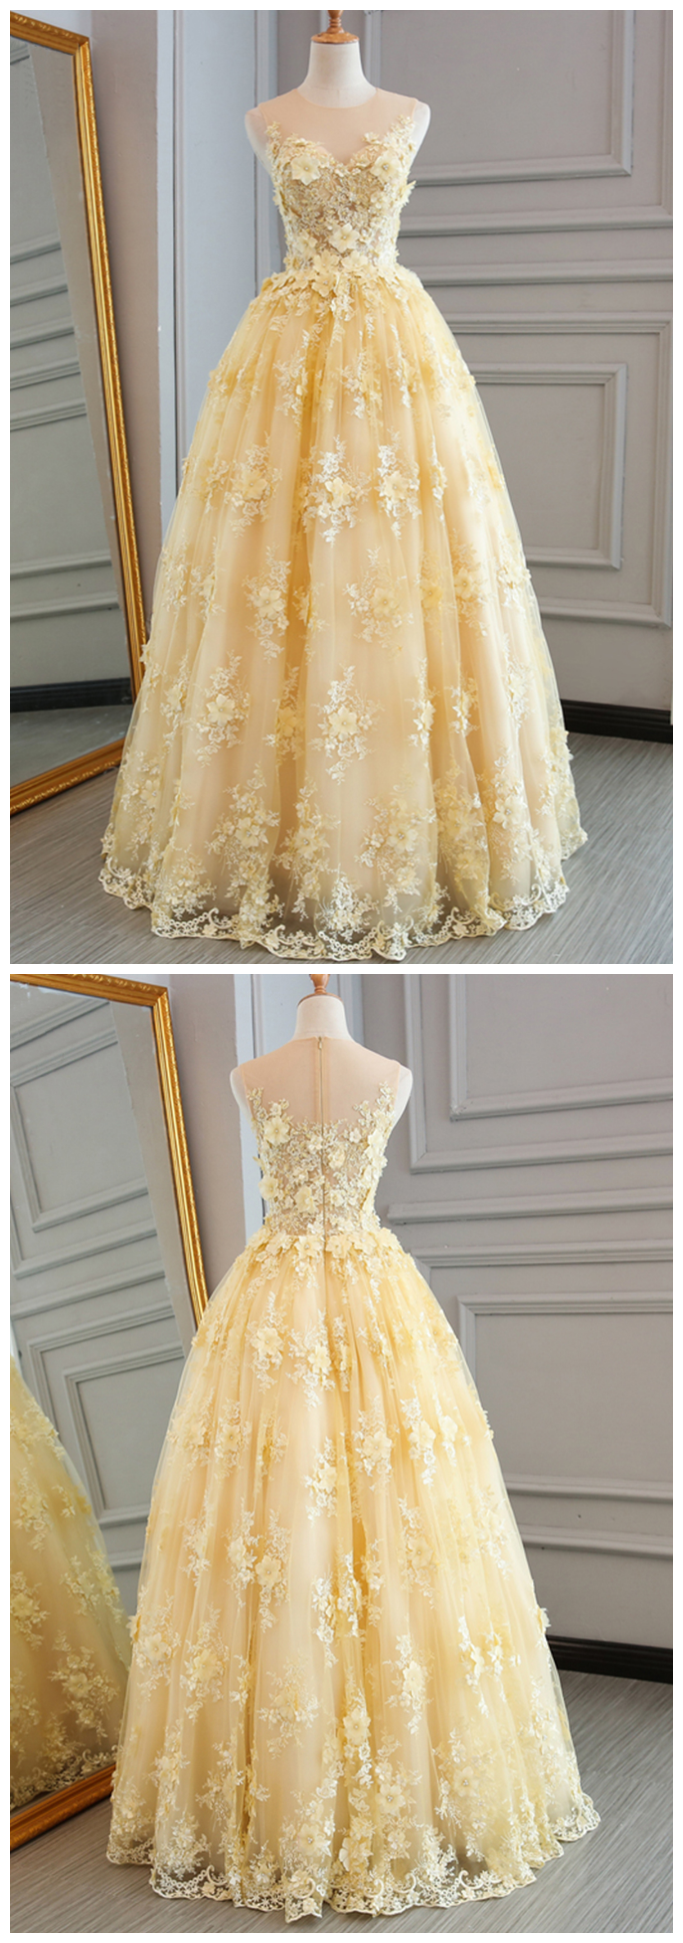 Prom Dresses, Fashion Prom Dresses,spring Yellow Lace Customize Long A-line Senior Prom Dress, Long Lace Halter Evening Dress